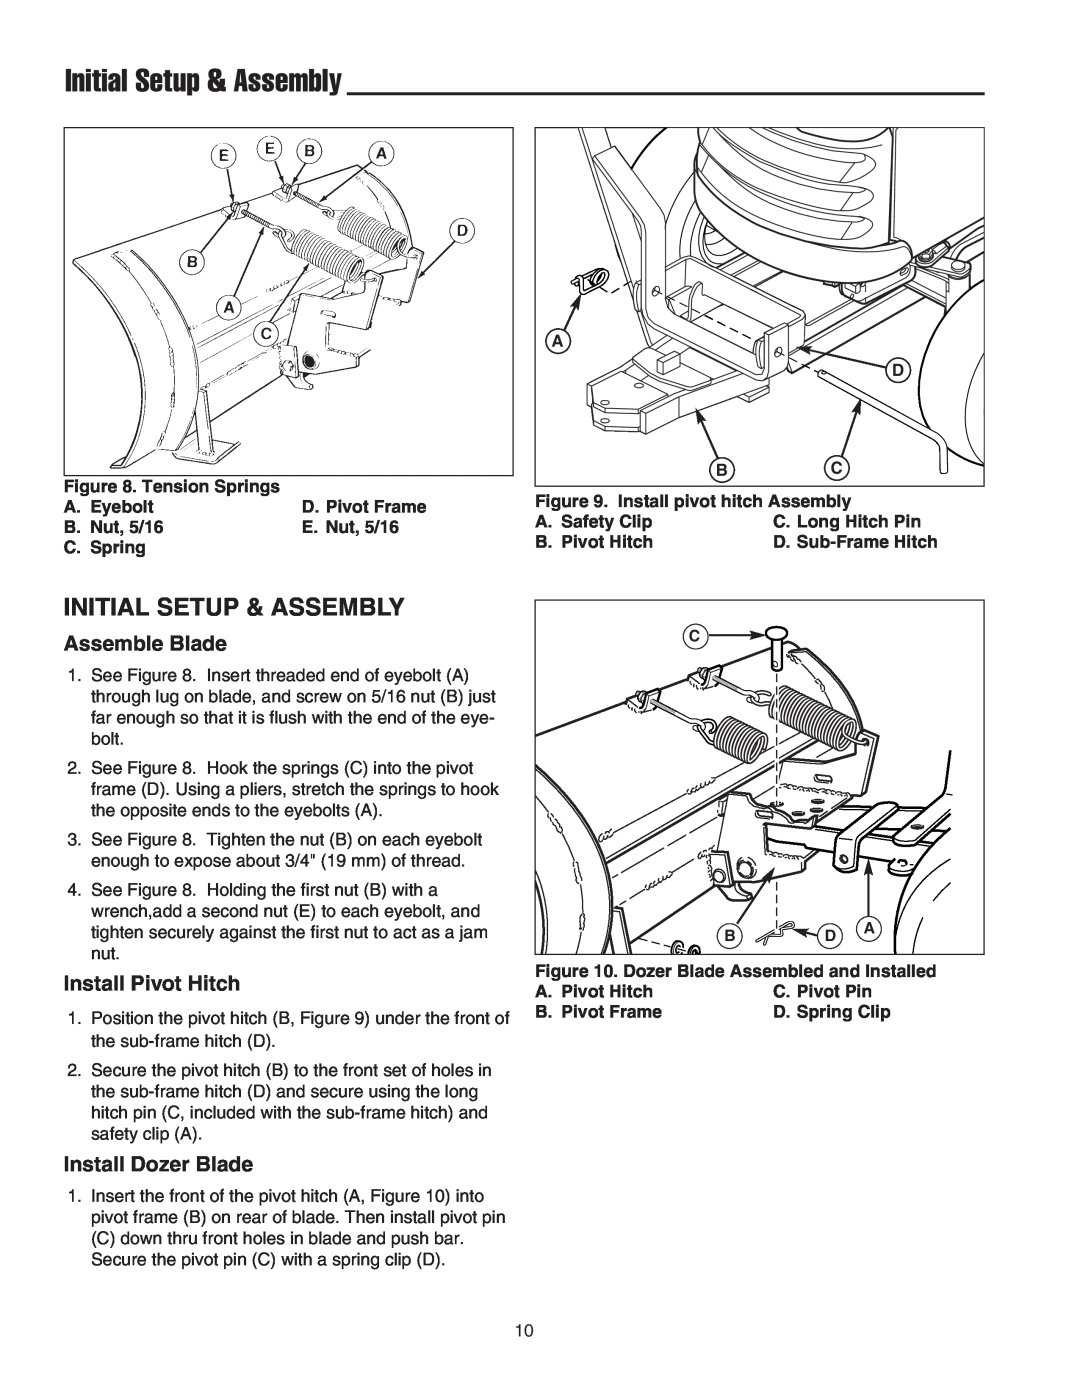 Snapper 1694147, 1723445-02 manual Initial Setup & Assembly, Assemble Blade, Install Pivot Hitch, Install Dozer Blade 